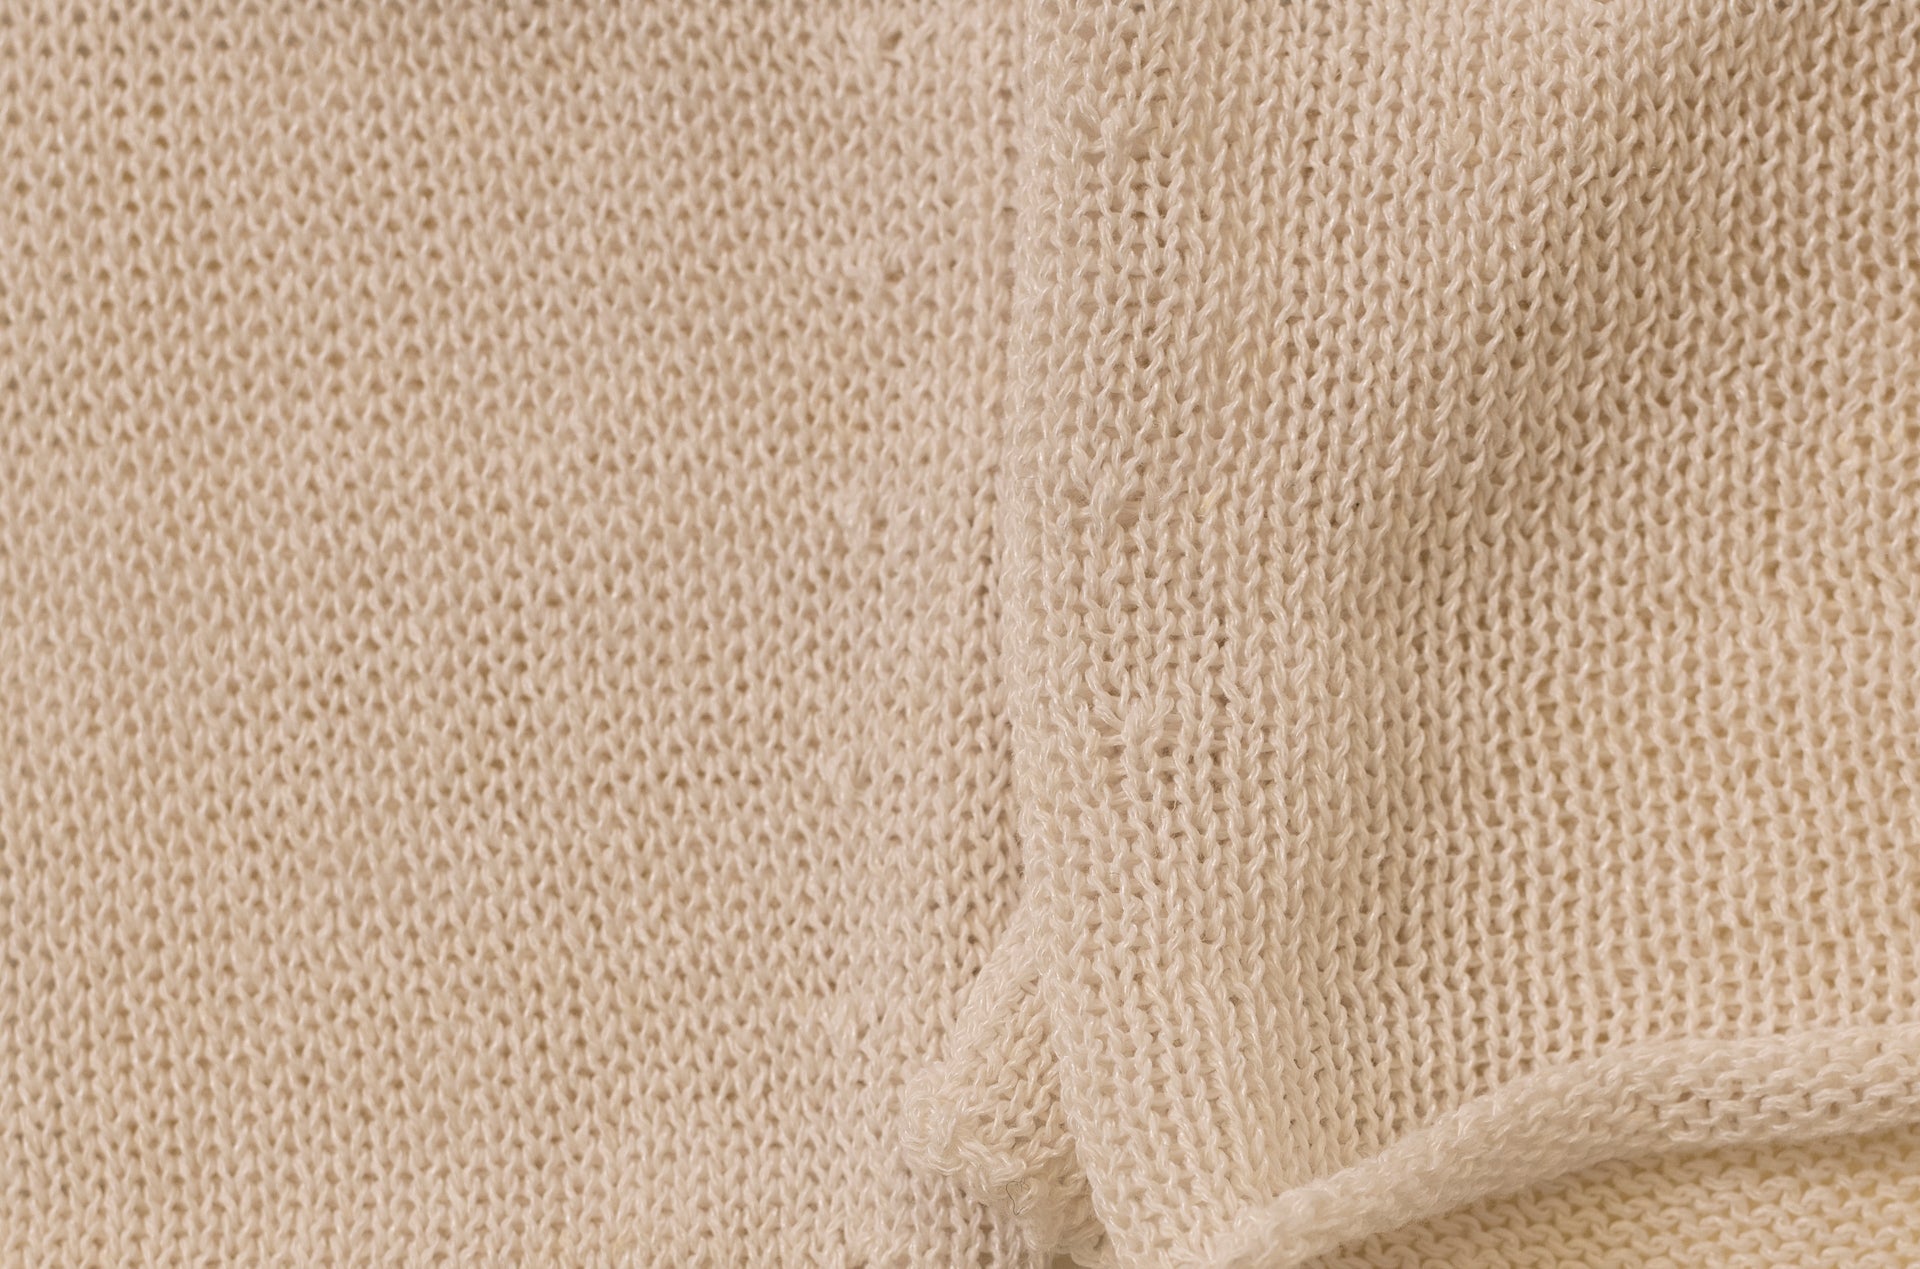 Cfdtrw9441 linen and cotton knit jumper - white Jumpers